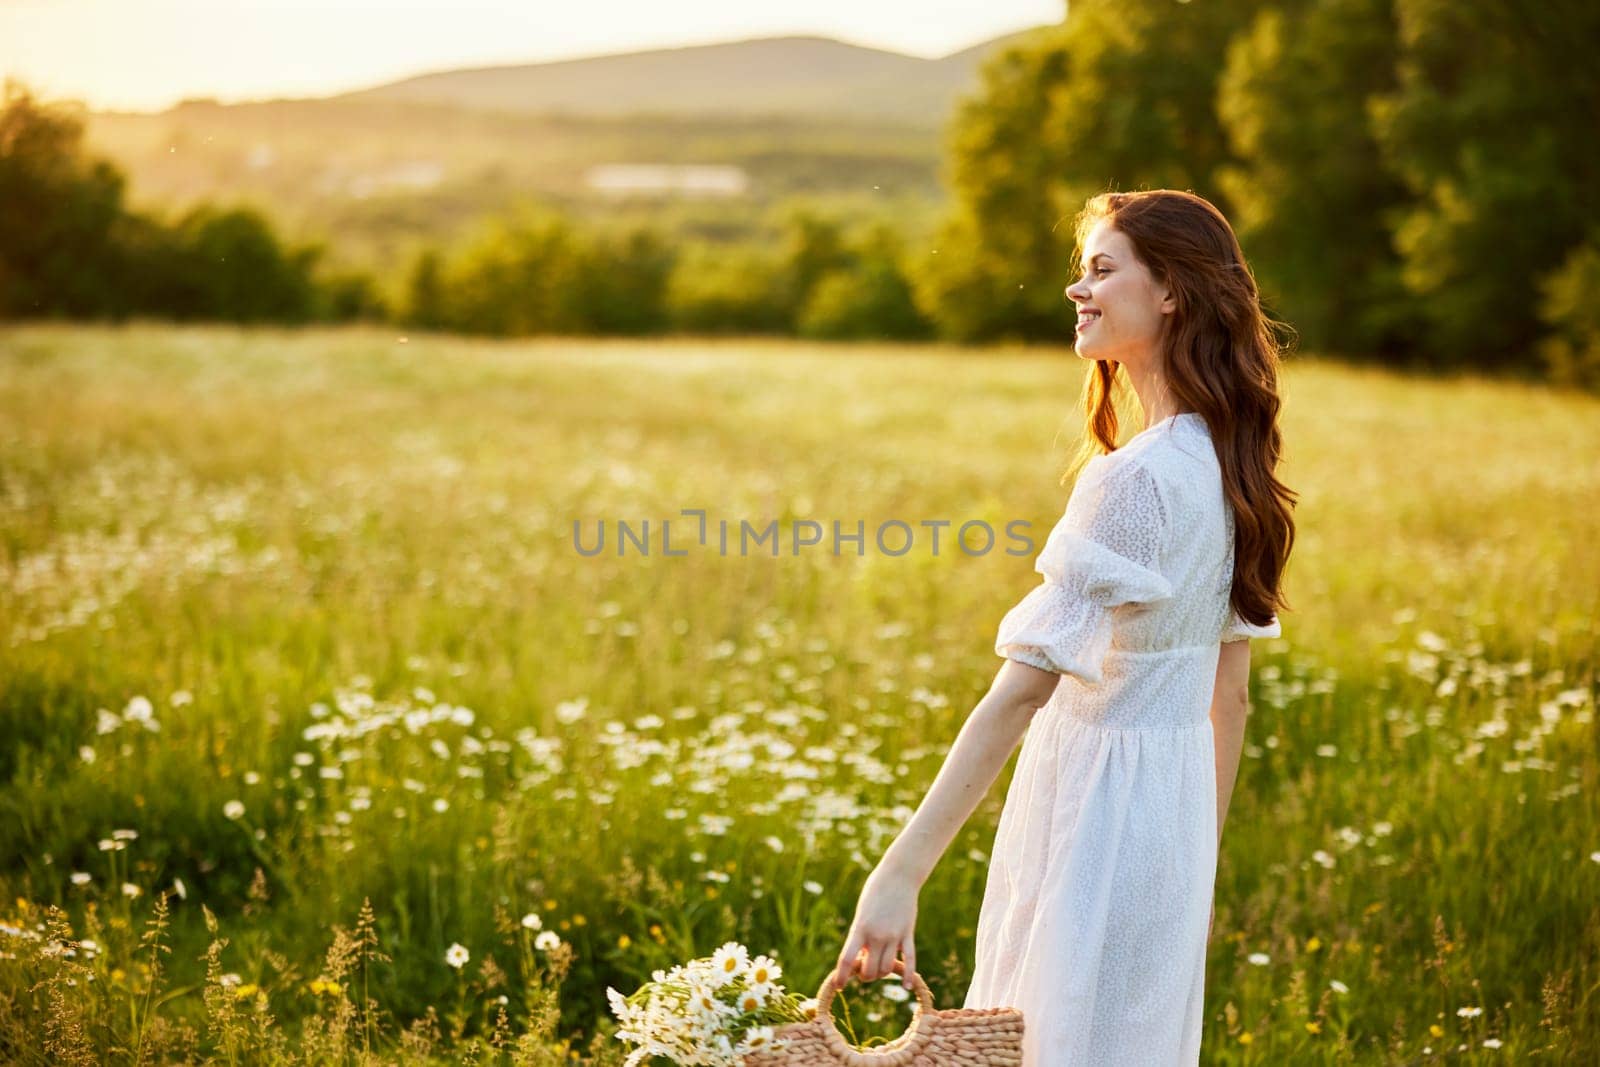 happy woman in a light dress and a wicker basket full of daisies enjoys nature walking in the field. High quality photo